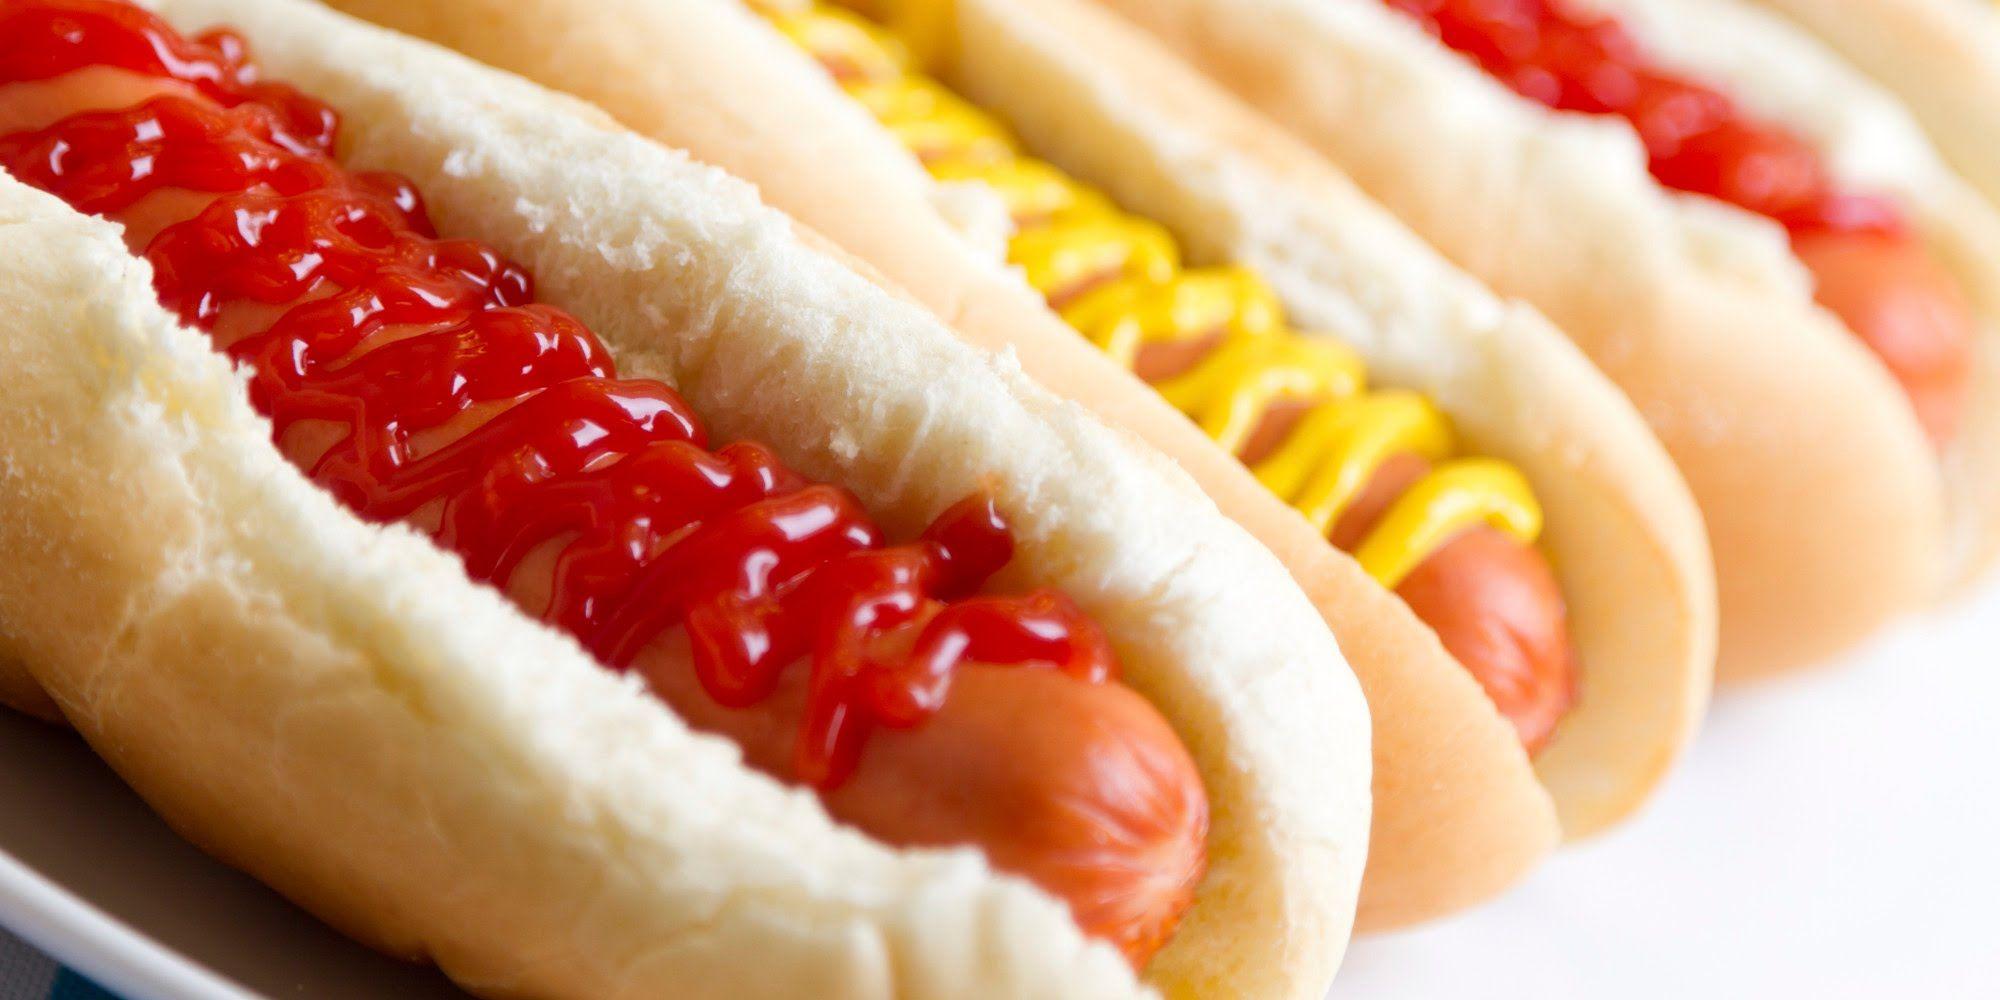 Why Doesn't McDonald's Sell Hot Dogs? Question